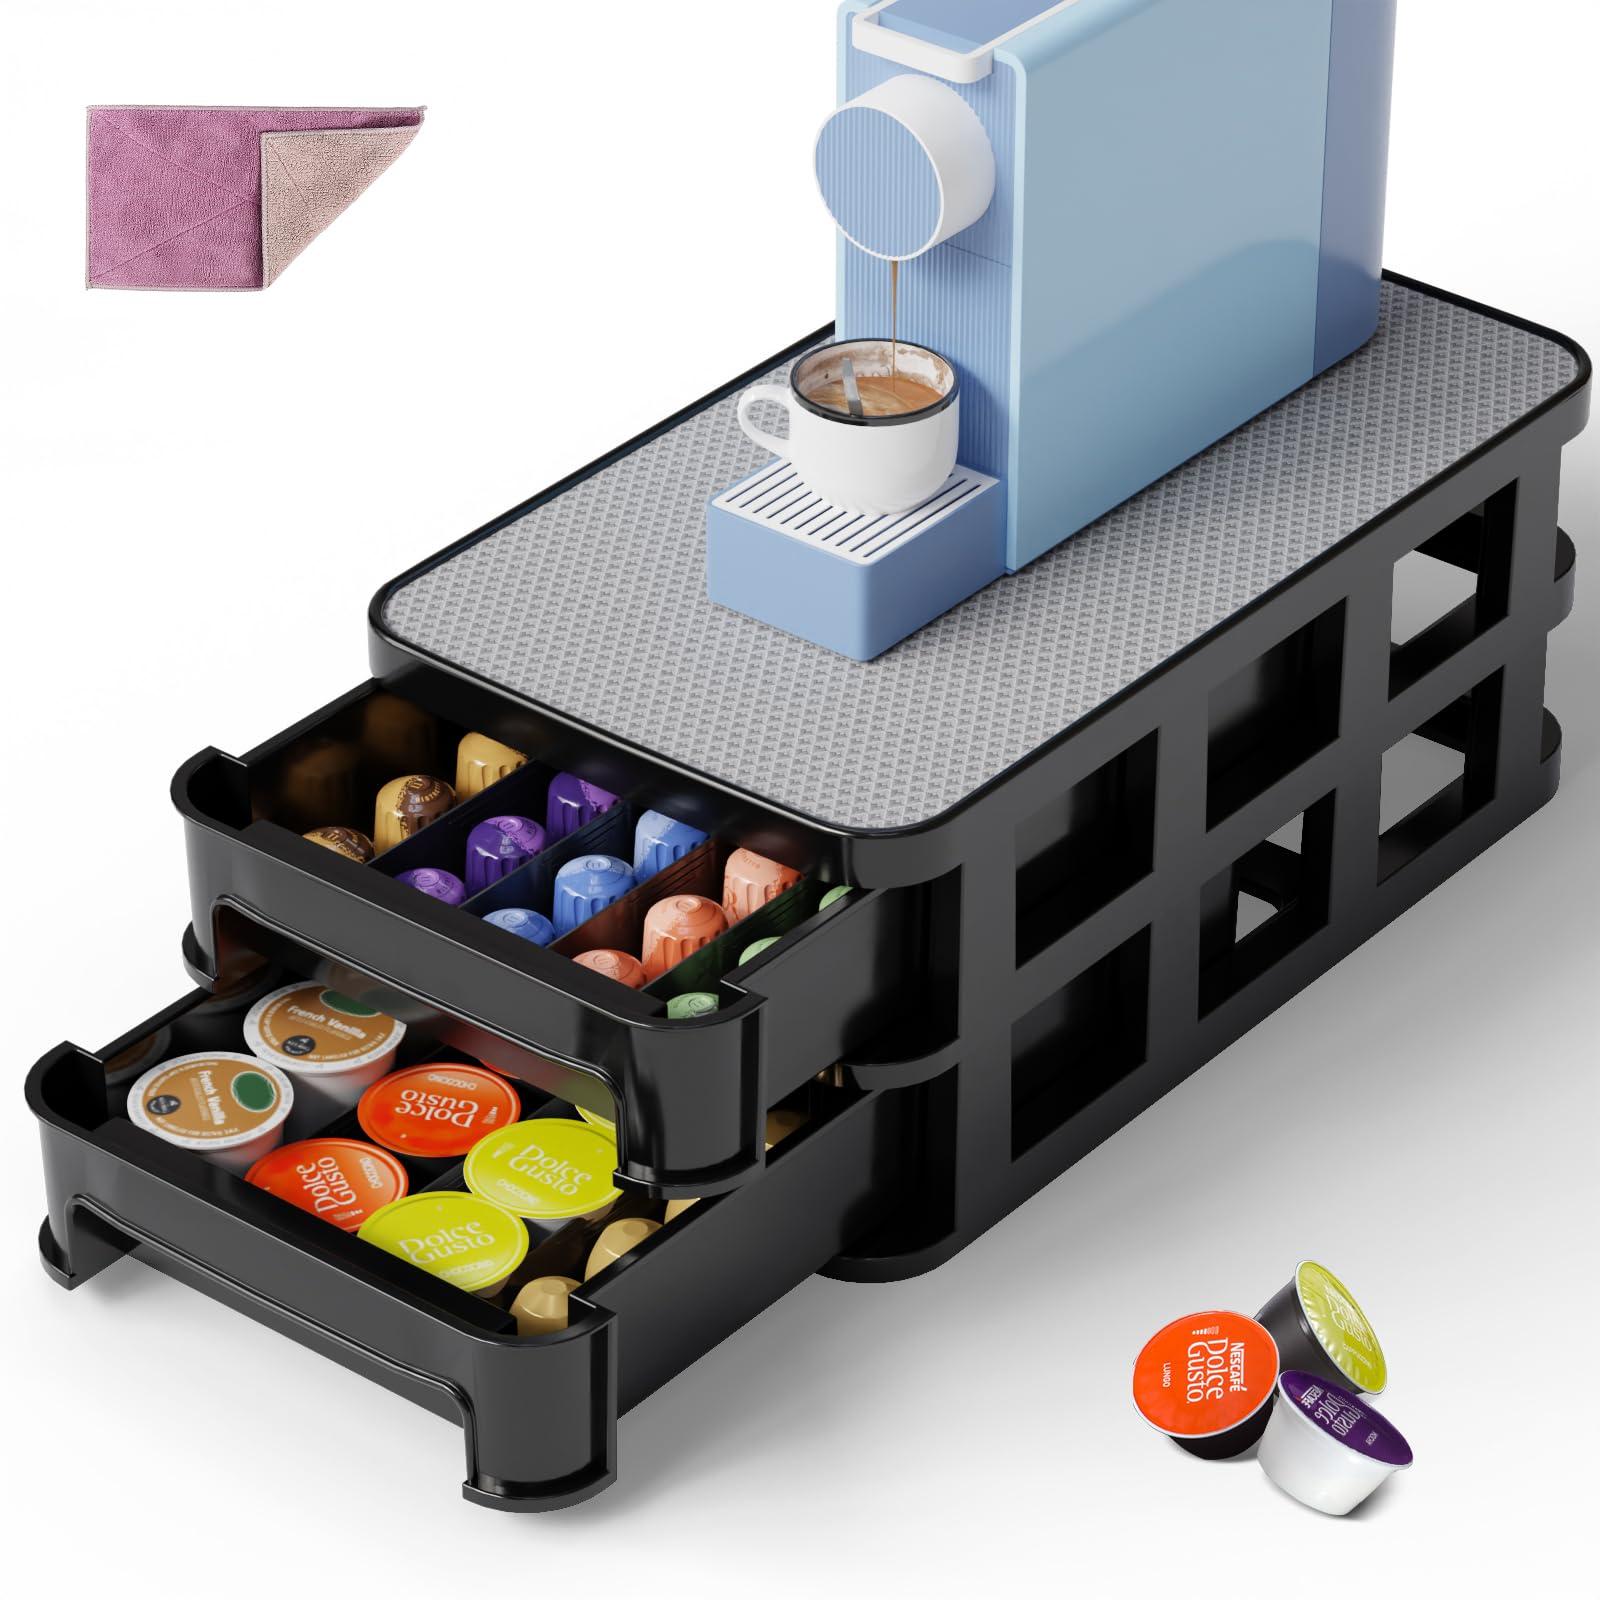 HEVOL Coffee Pod Storage, Non-Slip Coffee Holder Organiser for Dolce Gusto, 2 Tier Coffee Capsule Holder Suitable for Kitchen Office (Capacity 60 Pods Max)